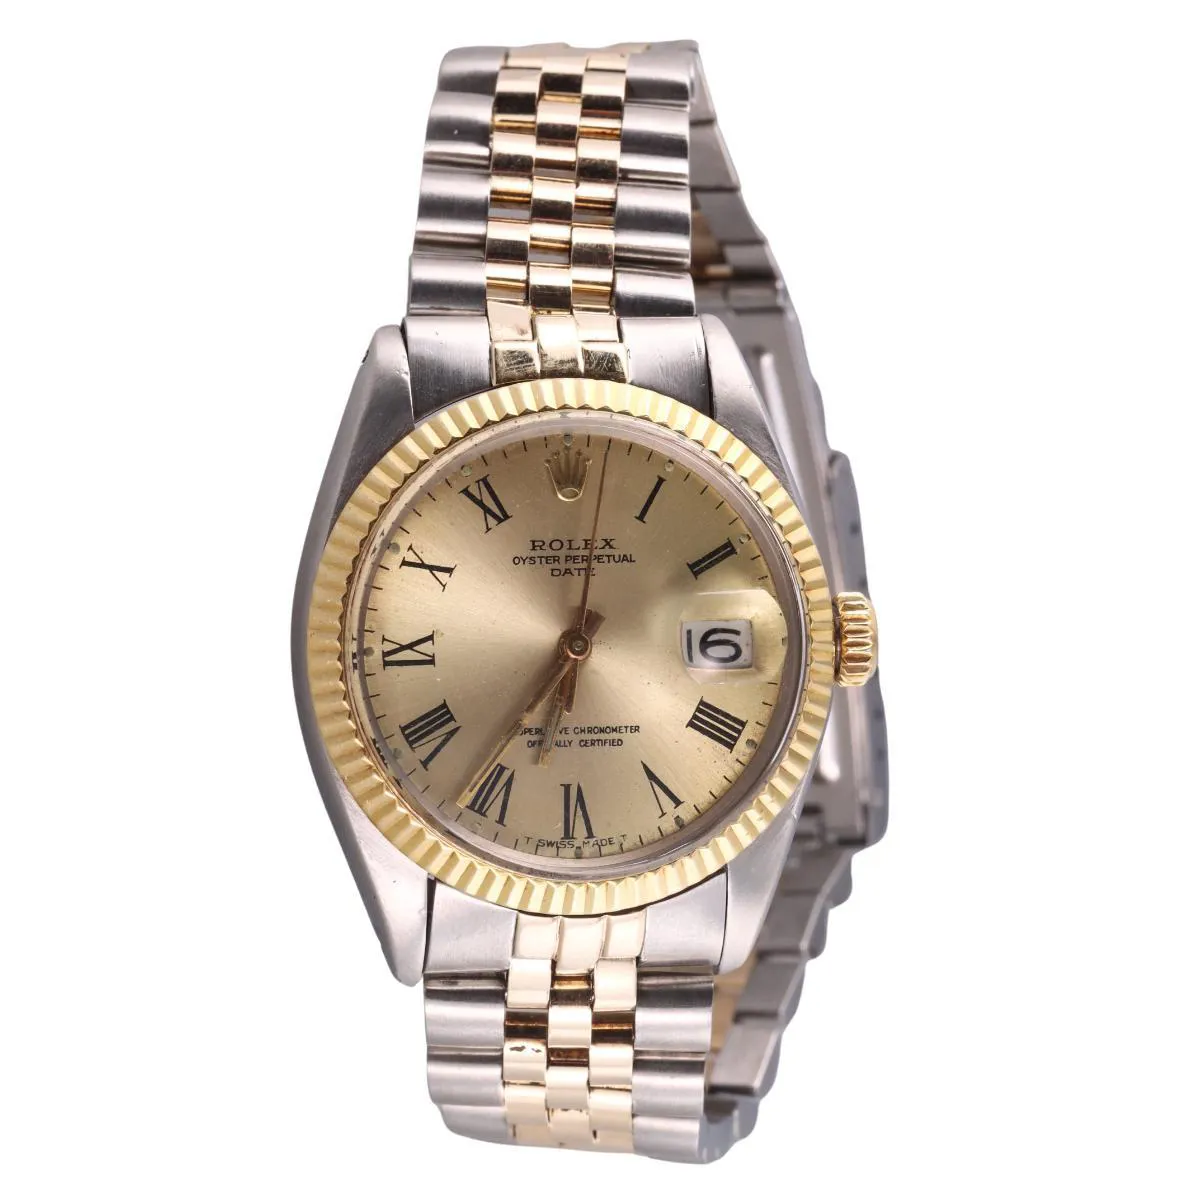 Rolex Oyster Perpetual Date 1500 34mm Yellow gold and stainless steel Gold